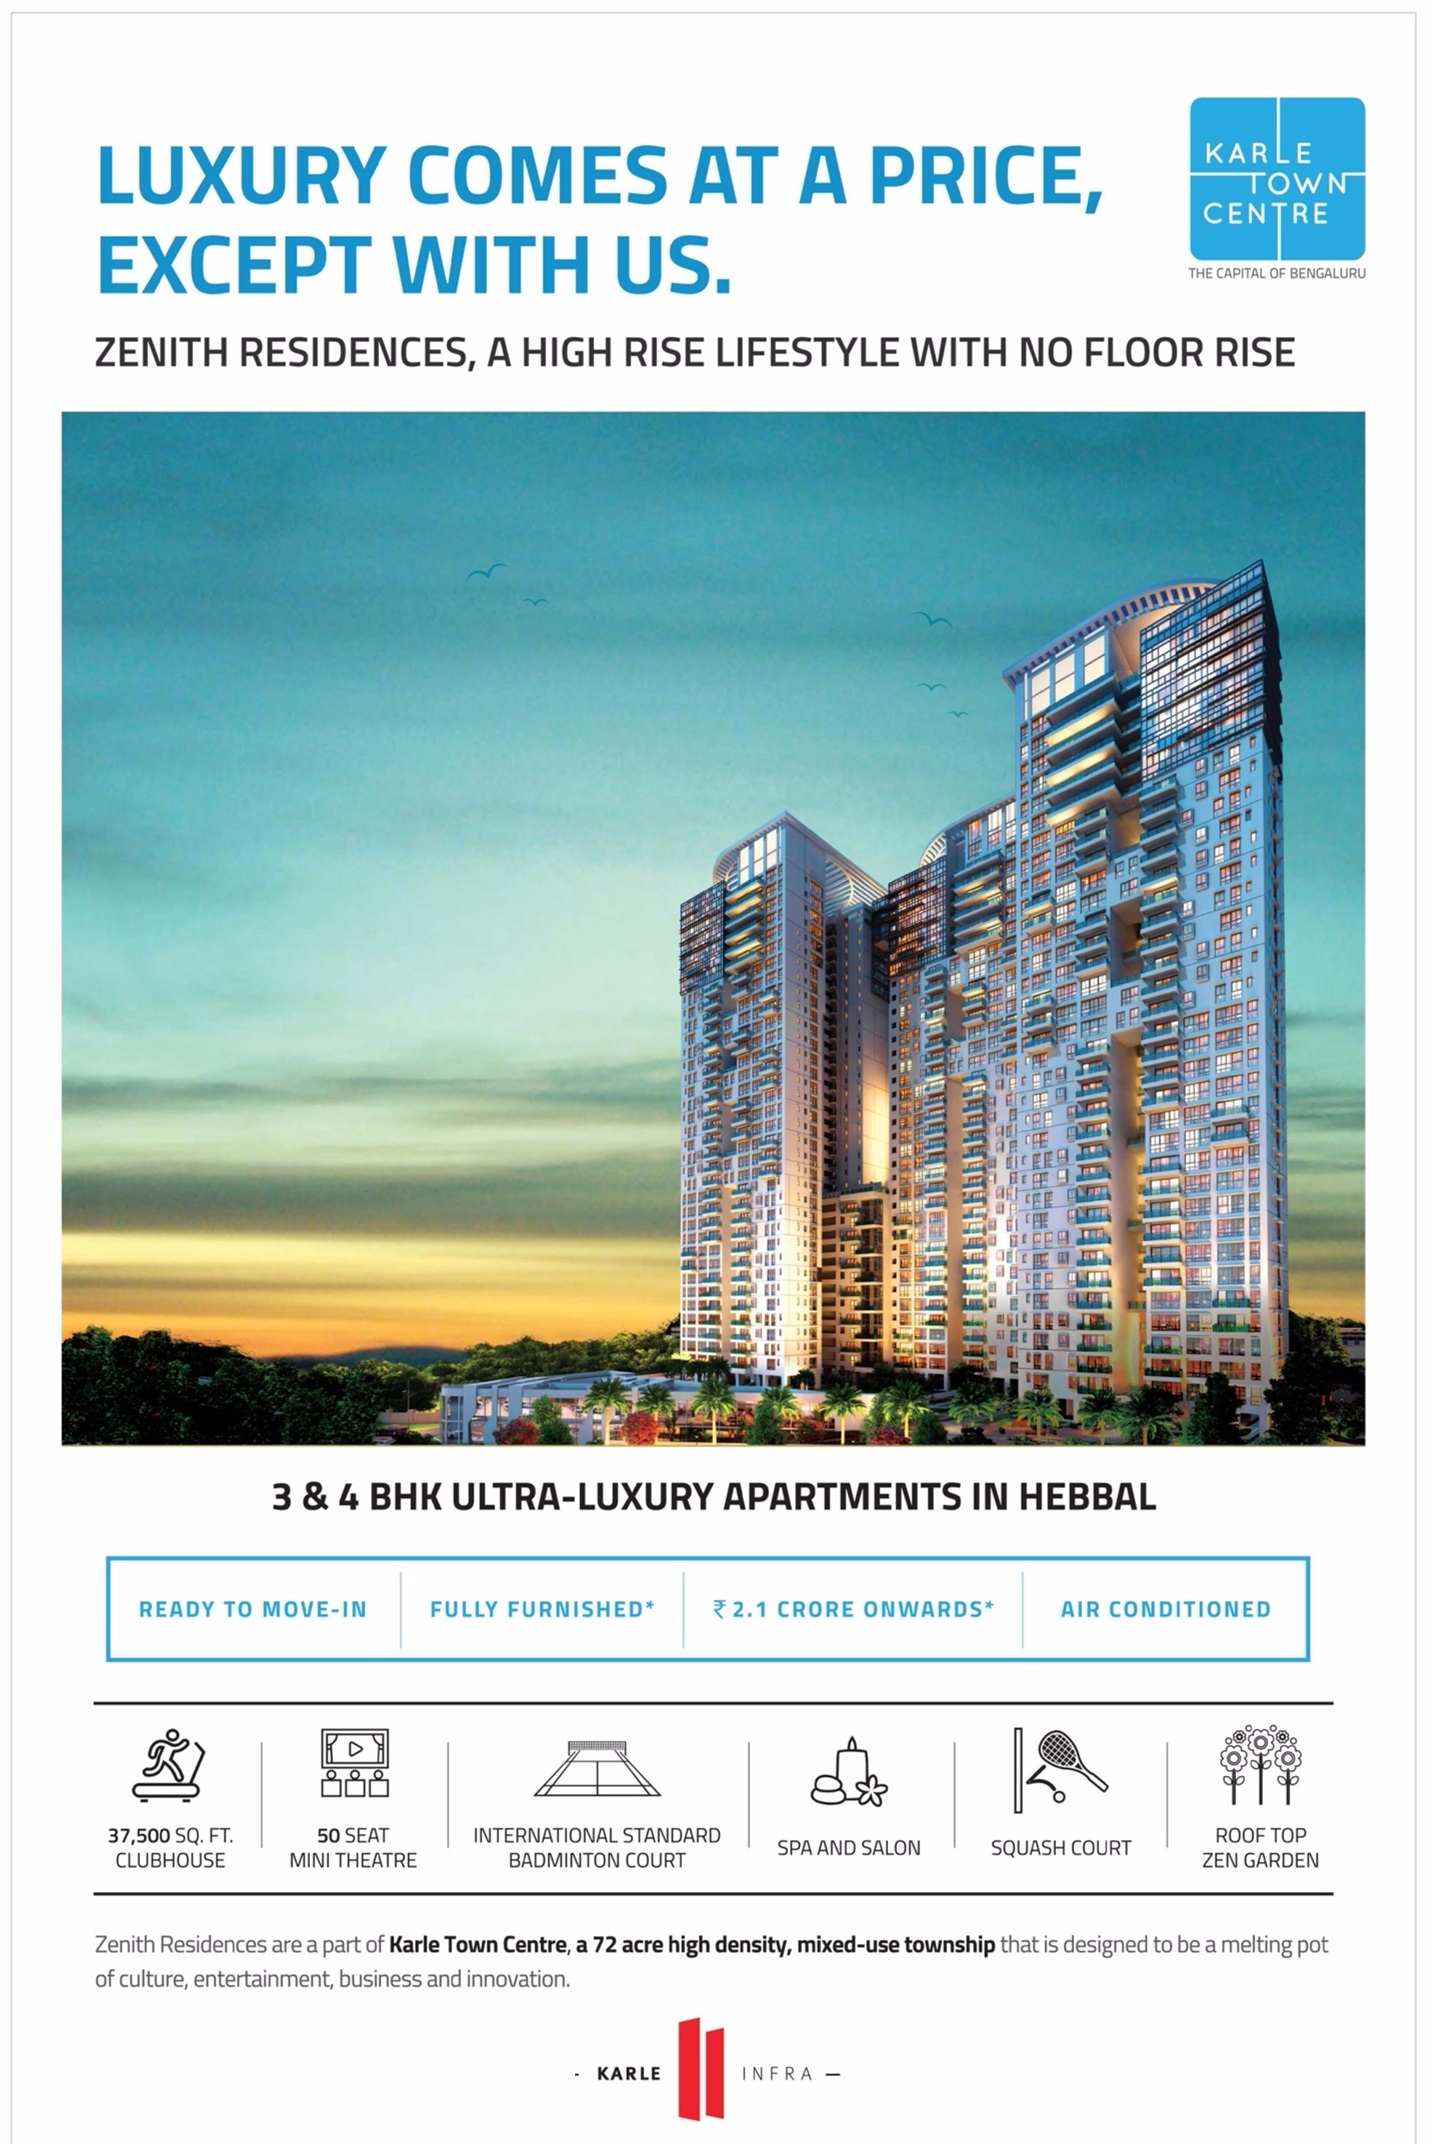 Experience a luxurious life with 3 & 4 BHK ultra luxury apartments at Karle Town Centre, Bangalore Update